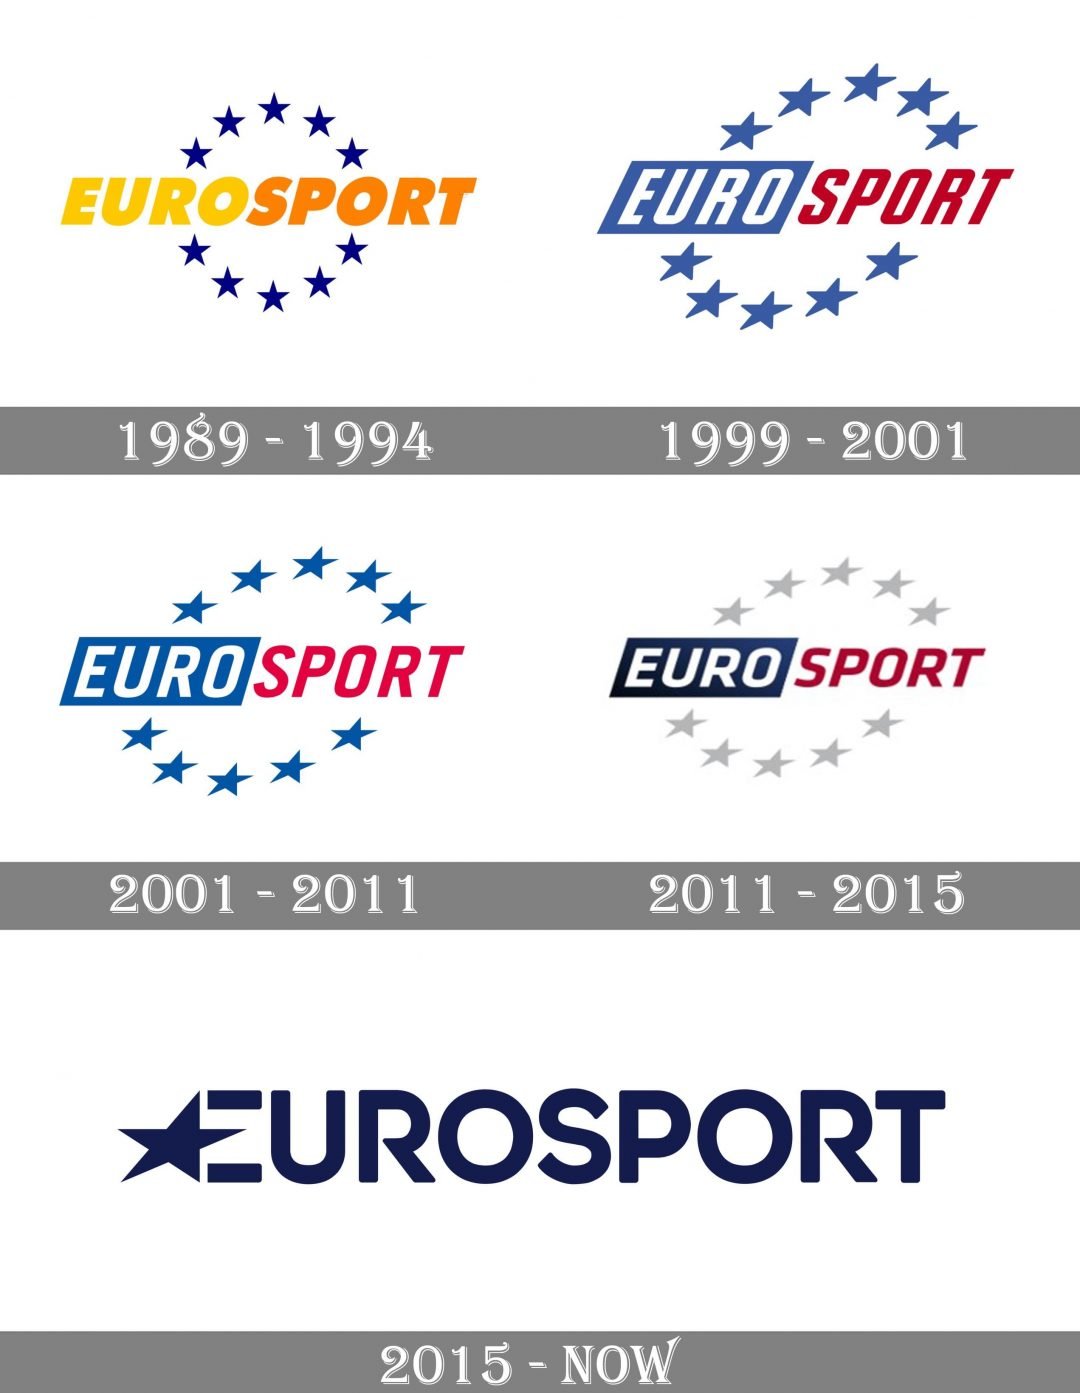 eurosport-logo-and-symbol-meaning-history-png